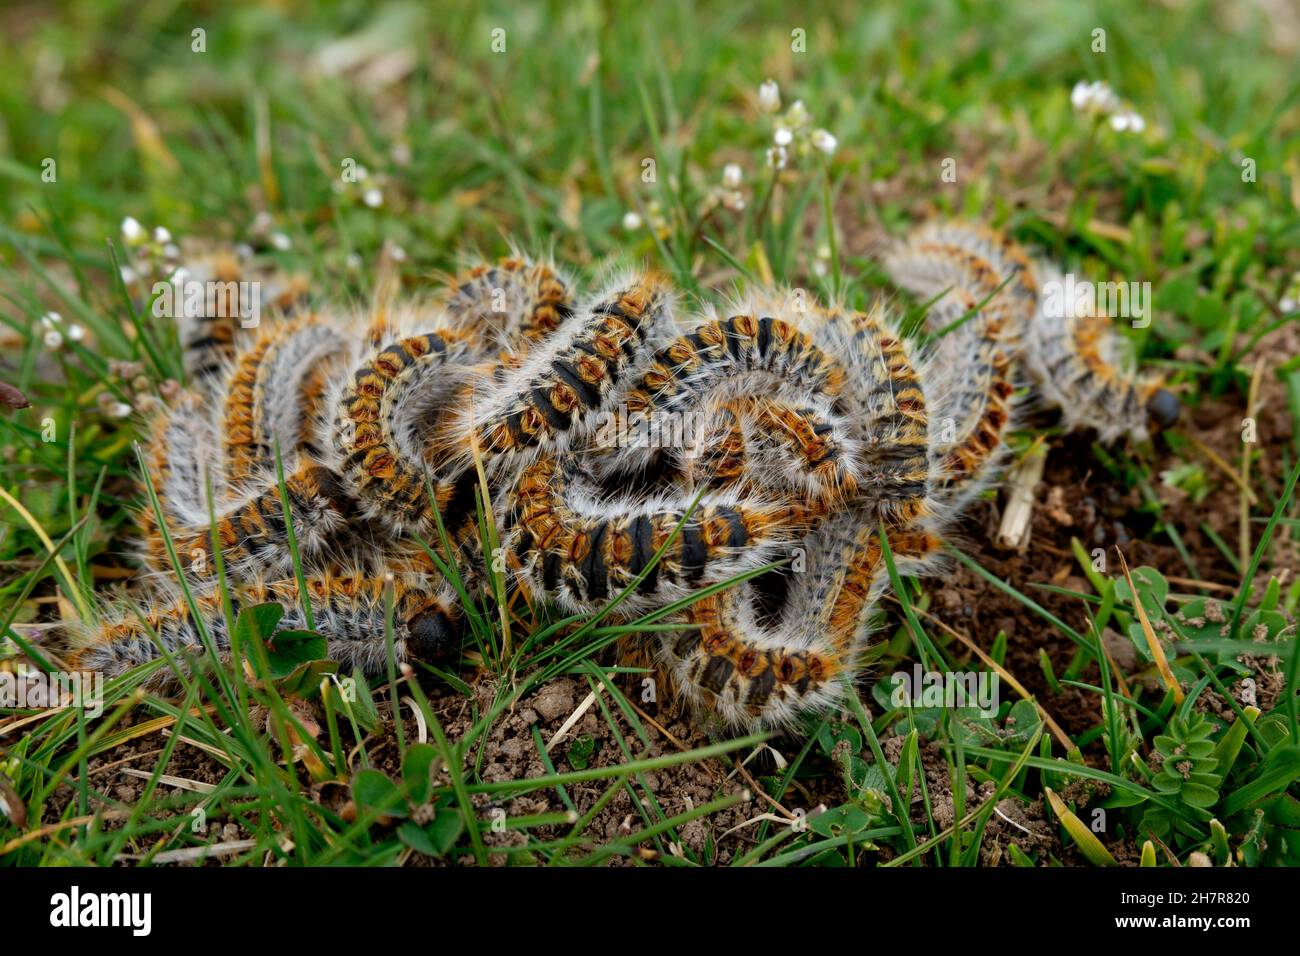 Pine caterpillar in a group Stock Photo